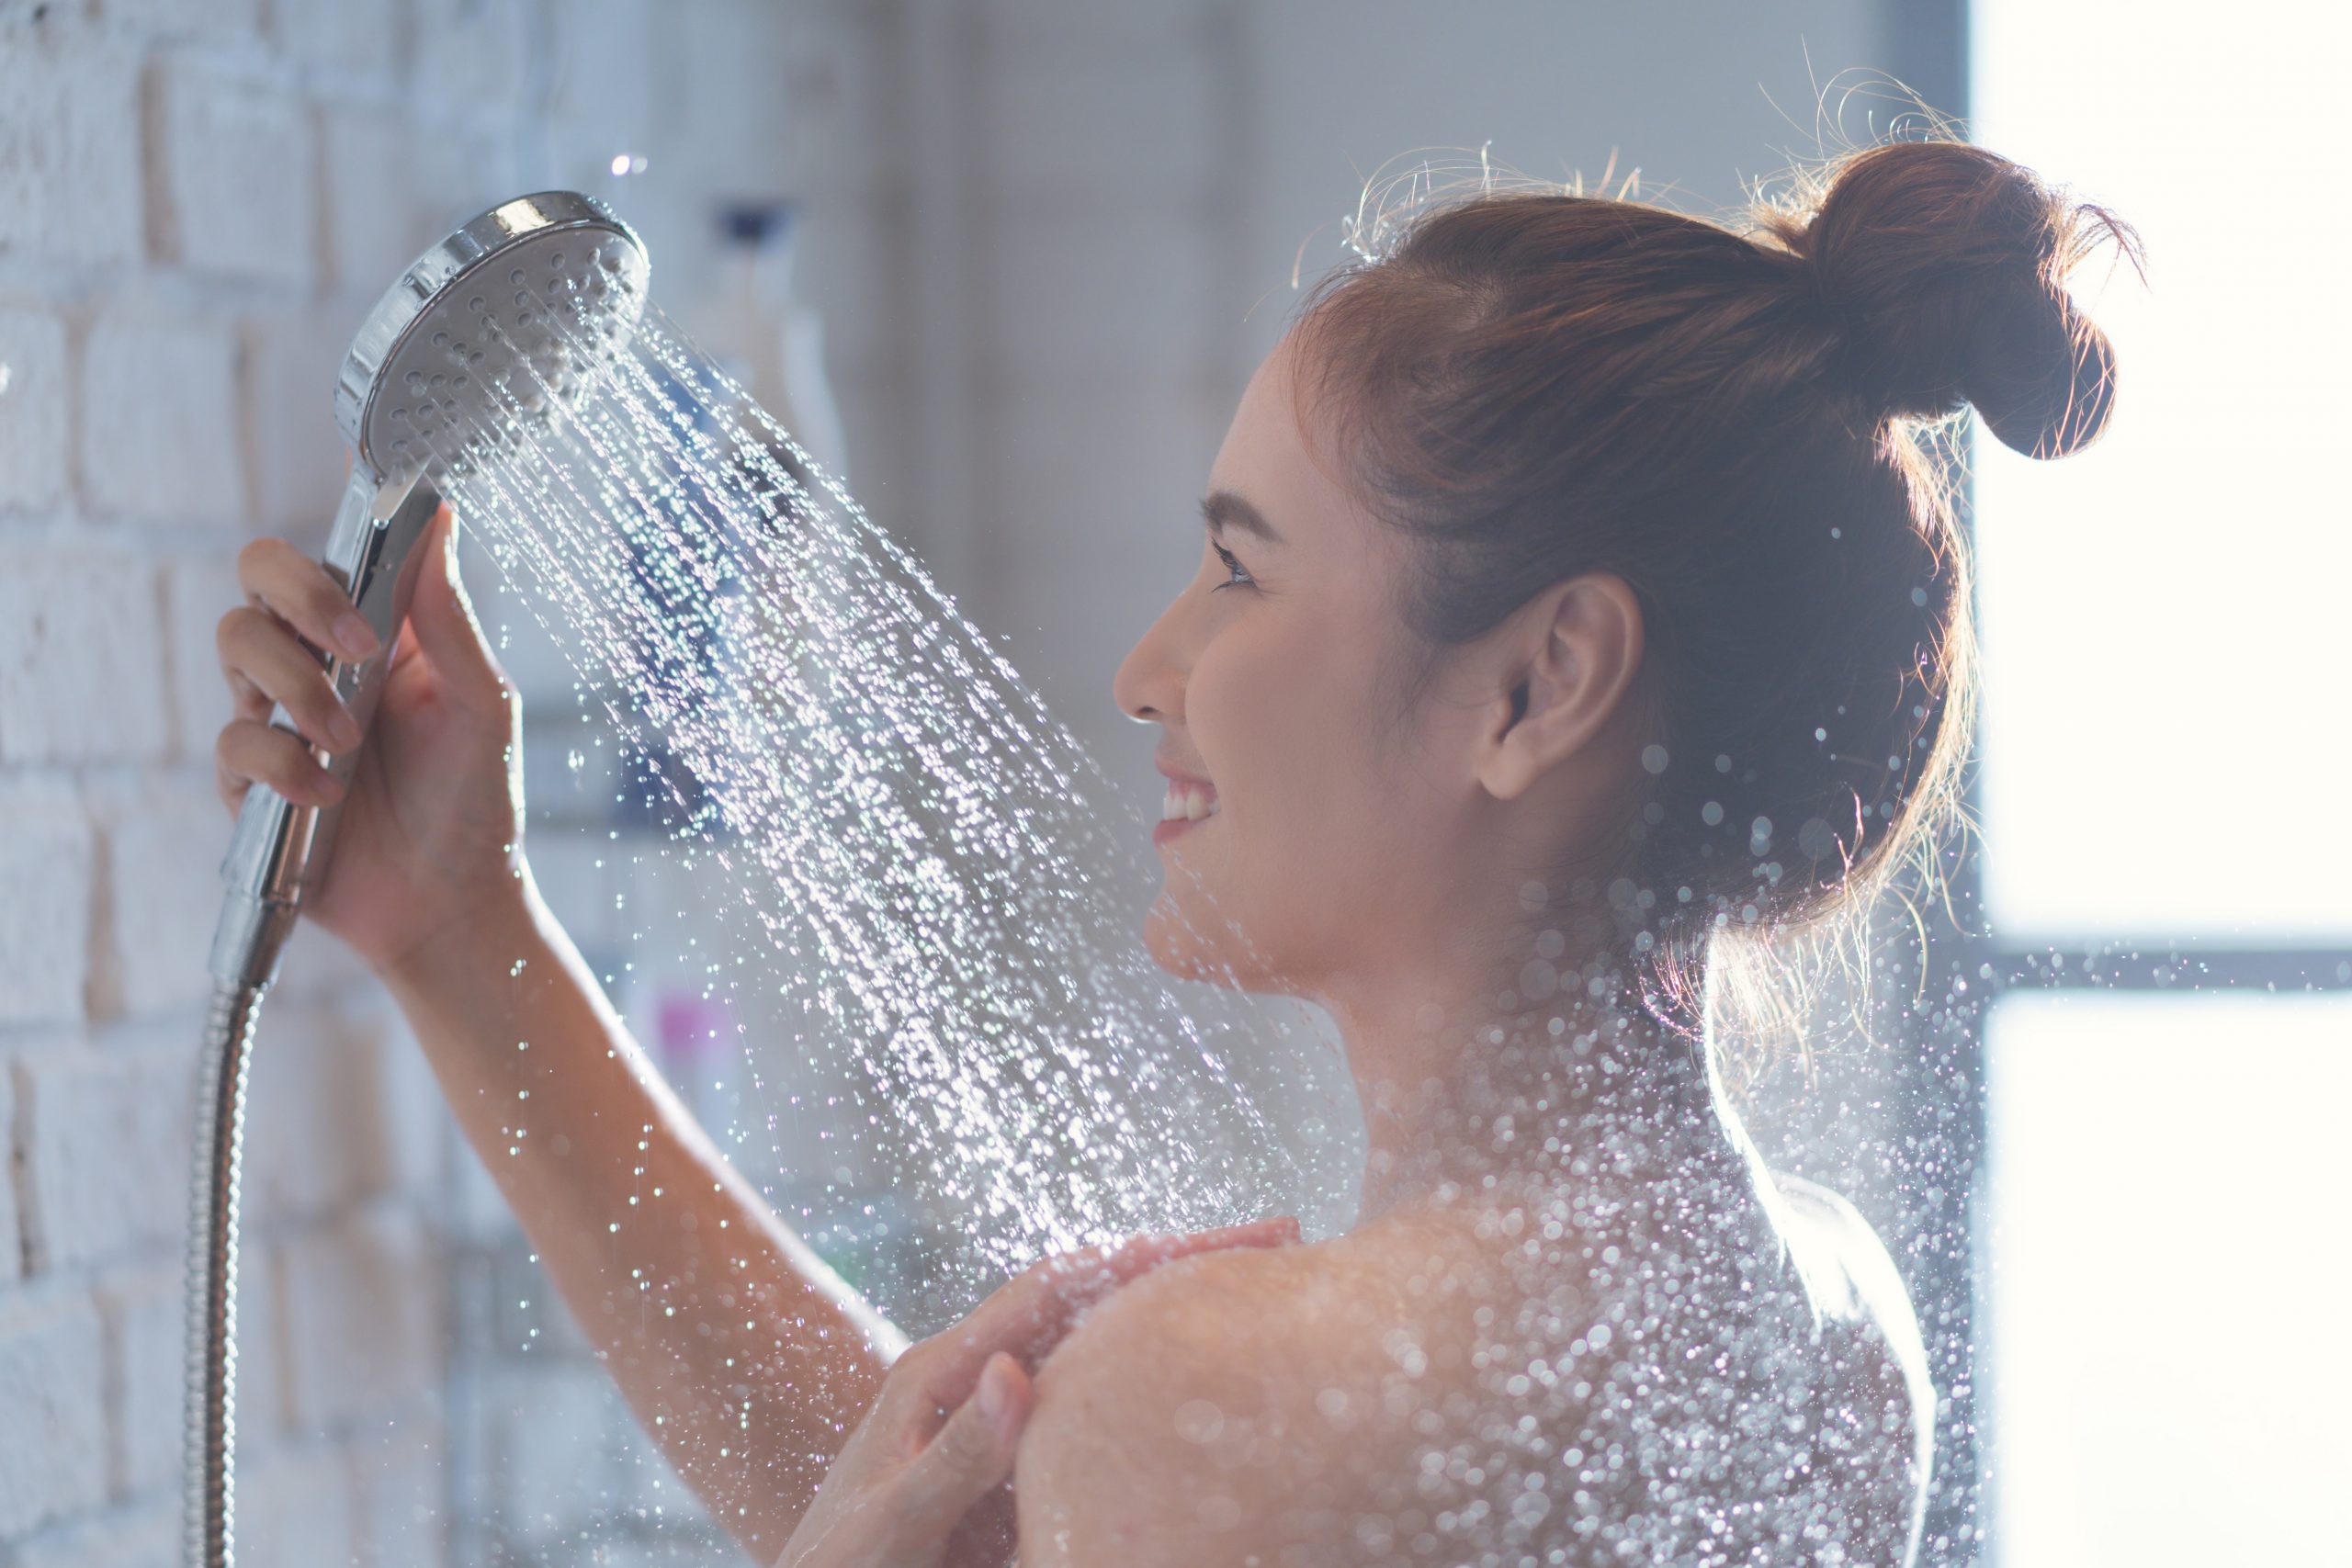 Why You Should Be Careful With Hot Water When it Comes To Skincare